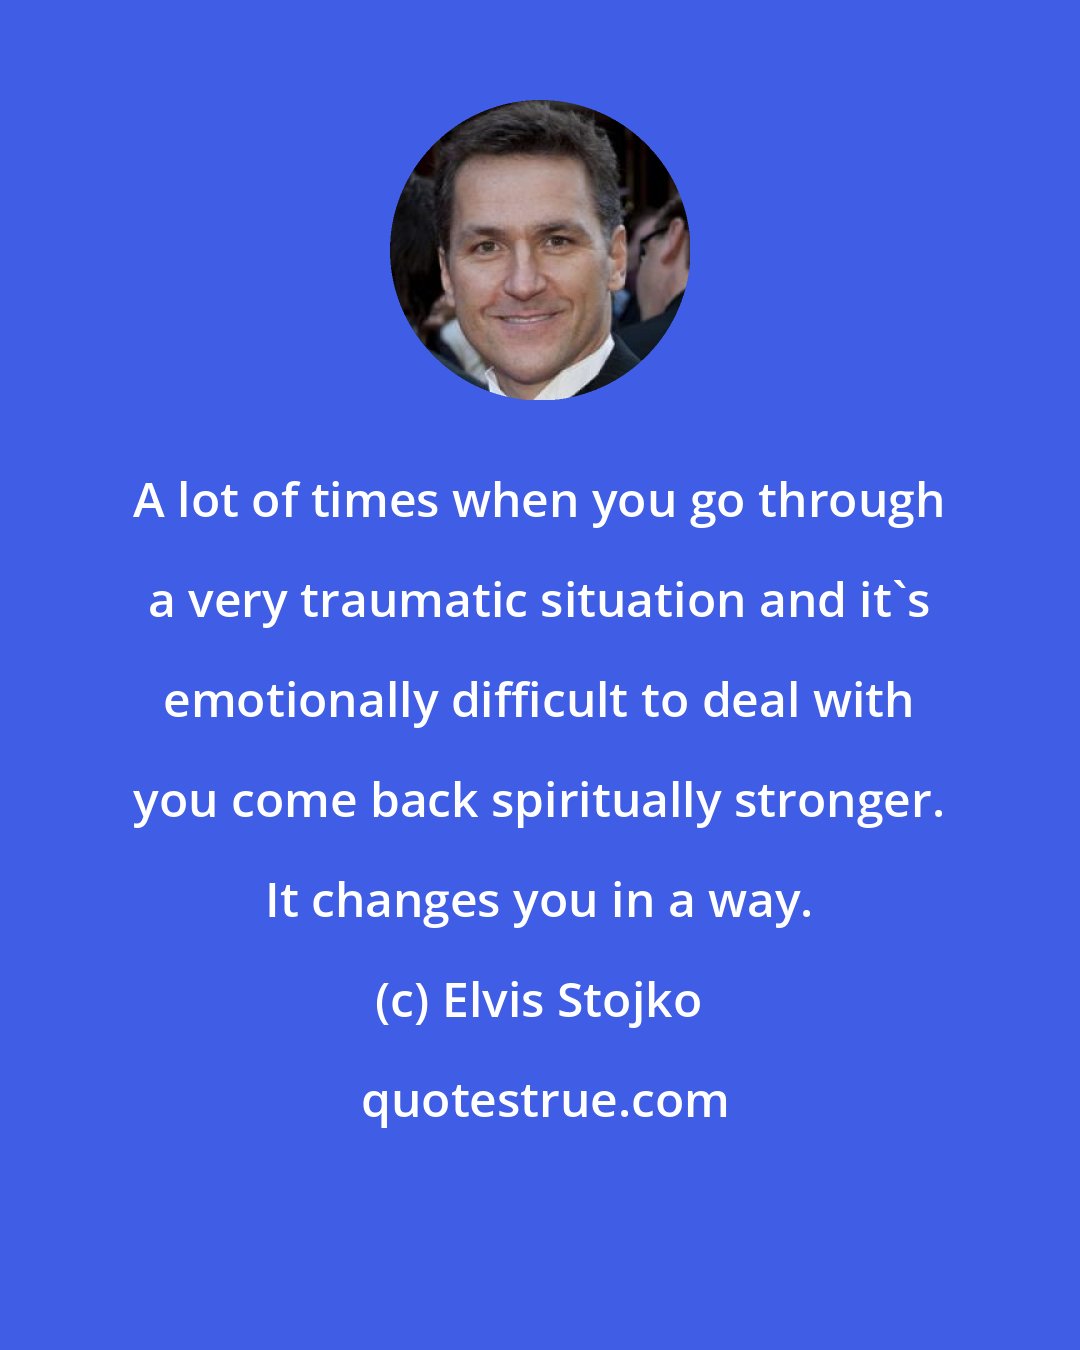 Elvis Stojko: A lot of times when you go through a very traumatic situation and it's emotionally difficult to deal with you come back spiritually stronger. It changes you in a way.